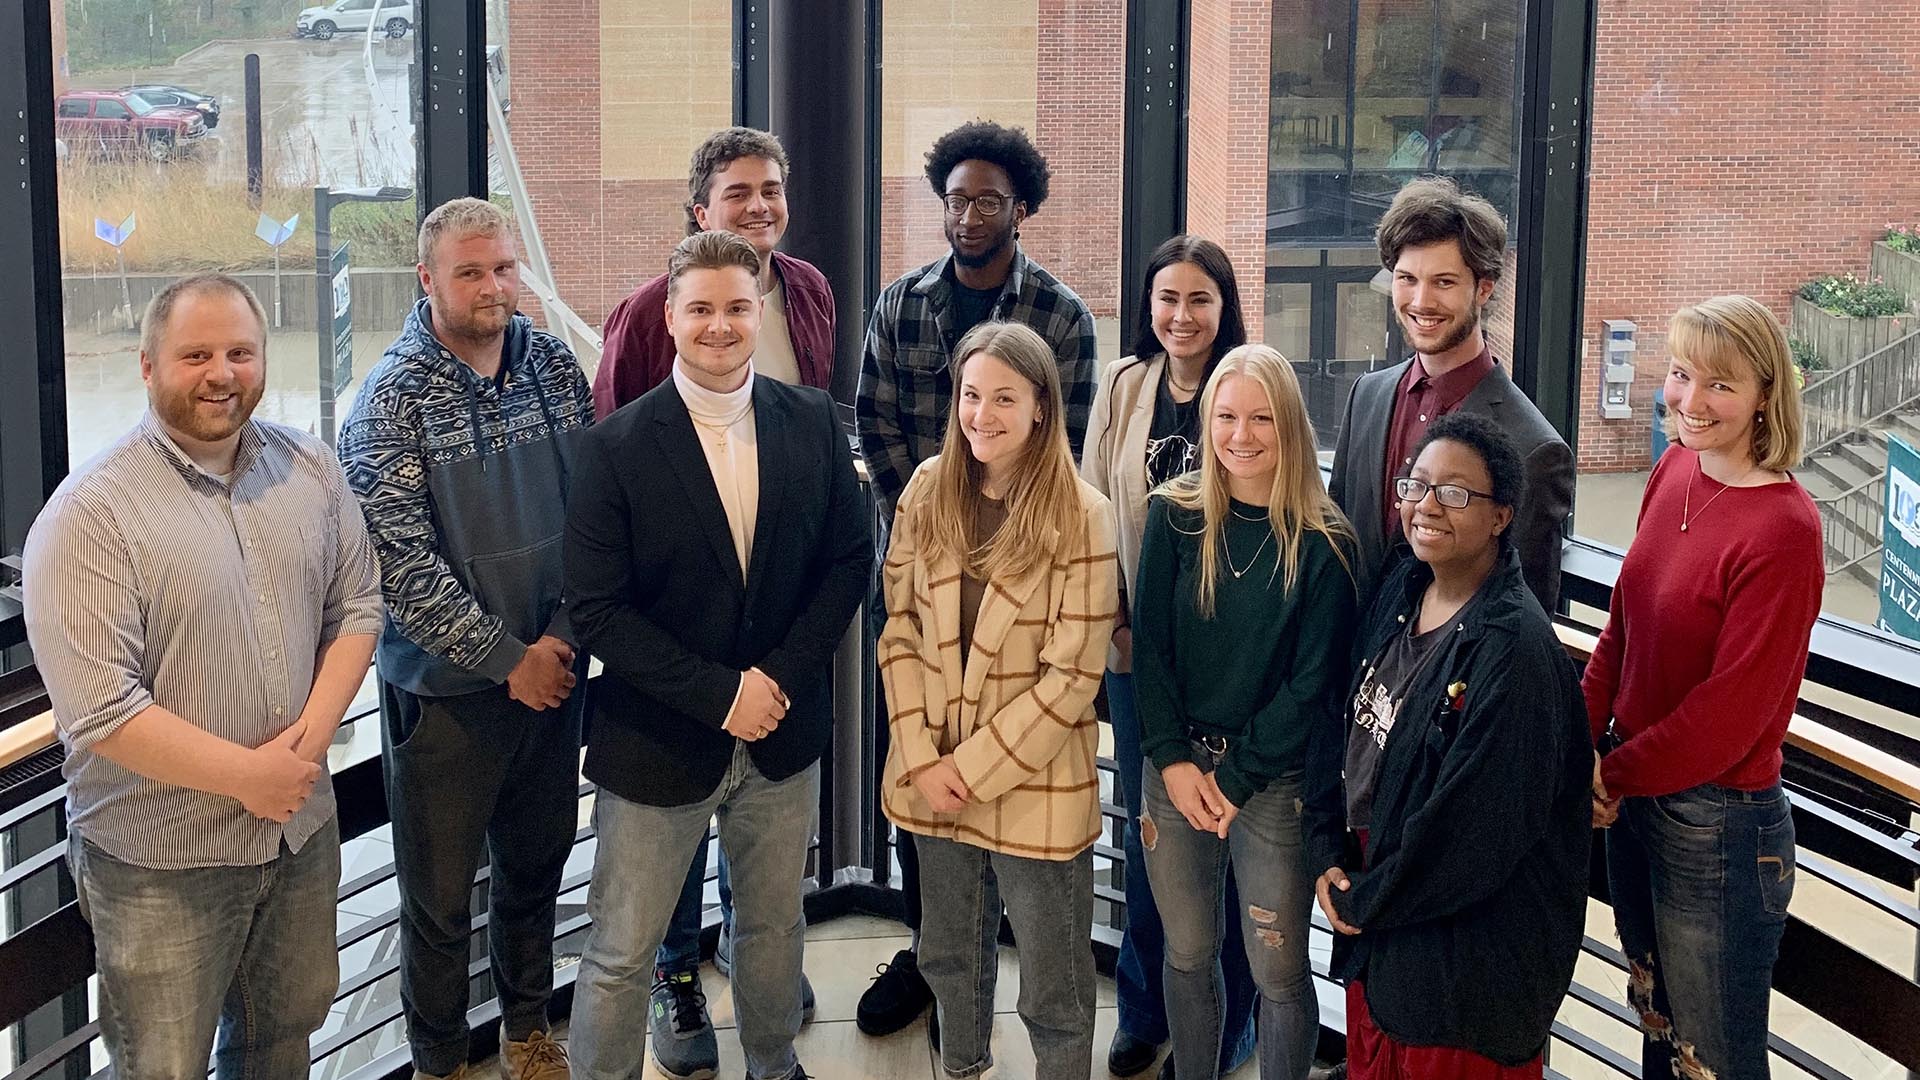 Students and their faculty advisor pose in front of the window in the Memorial Hall stairway, overlooking the BSU campus.